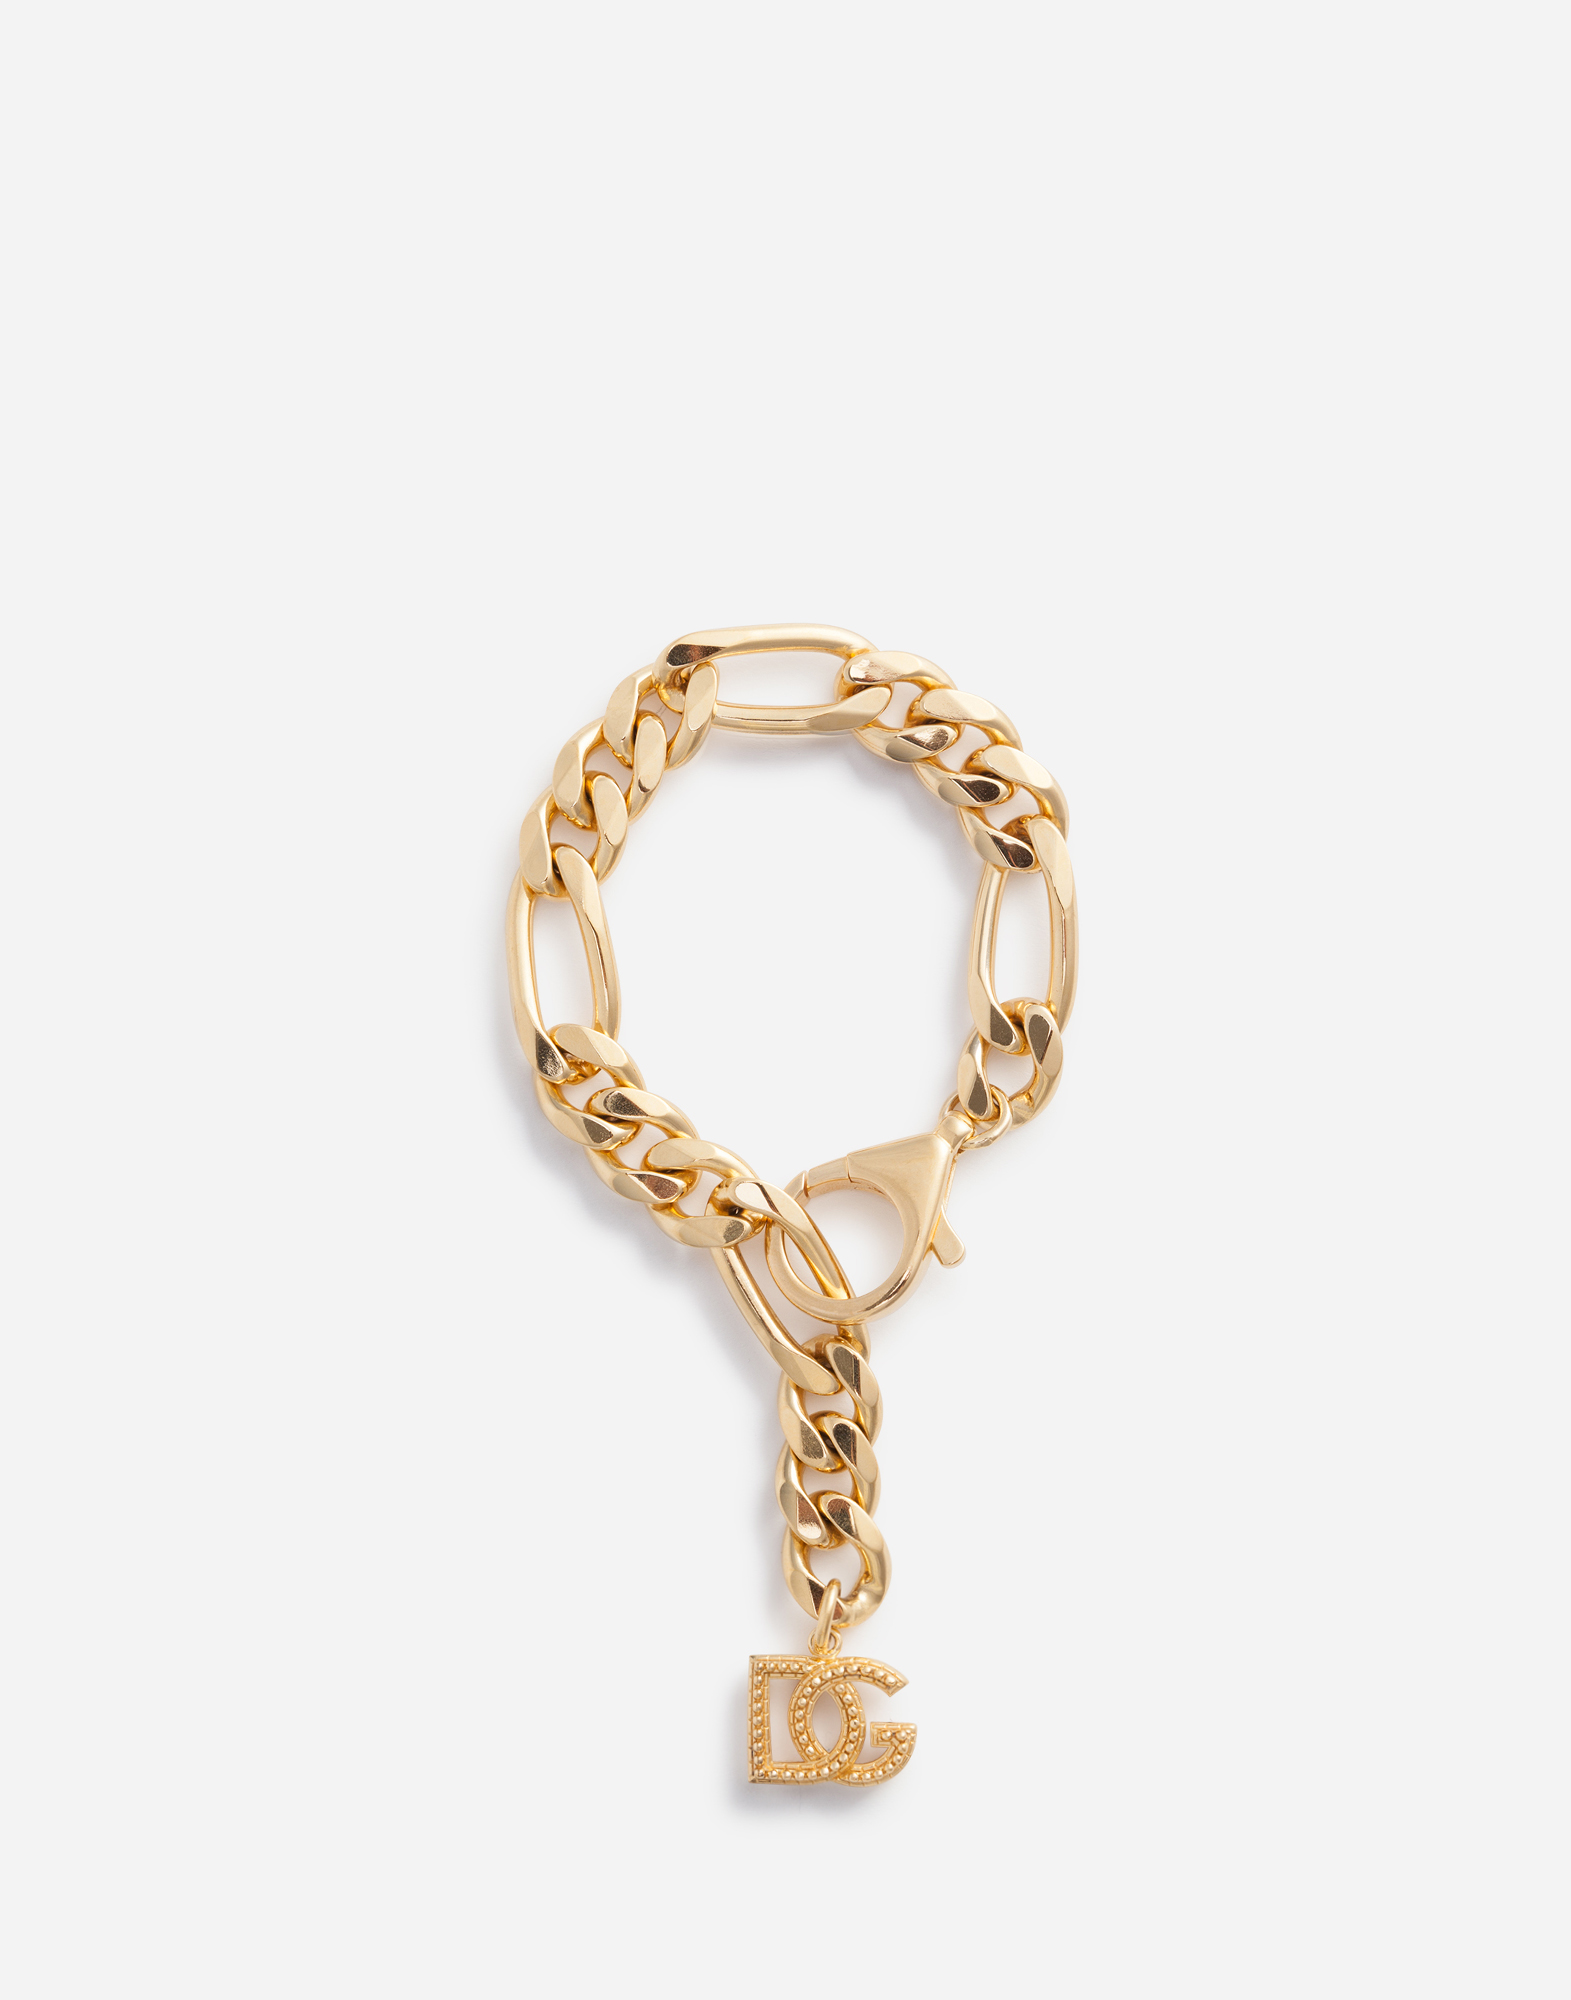 Chain bracelet with DG logo charms in Gold